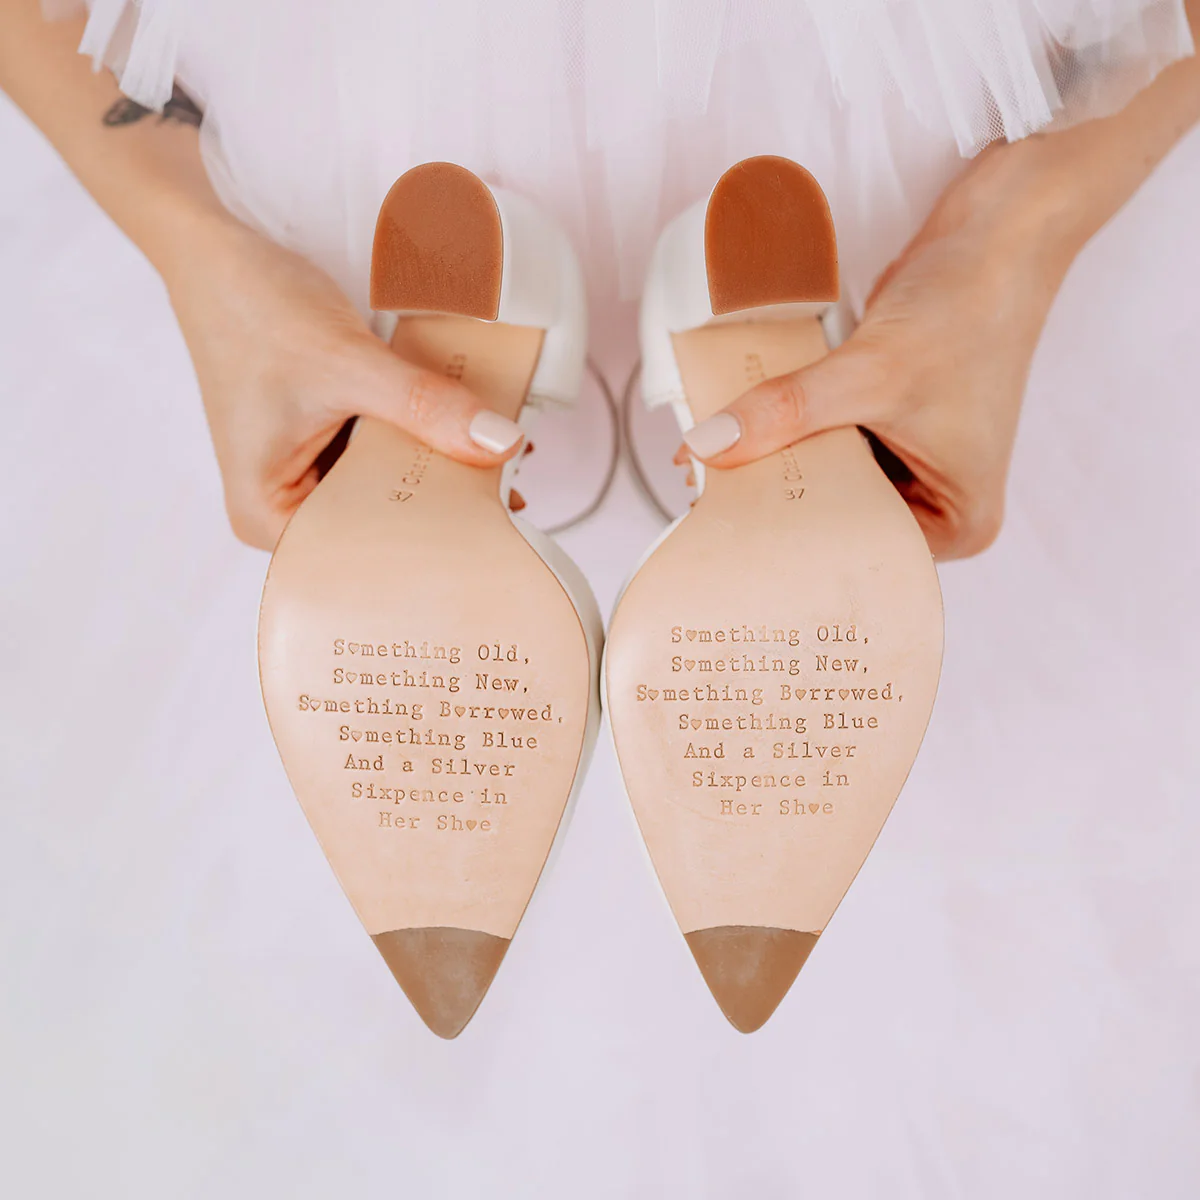 Charlotte MIlls Shoes saying